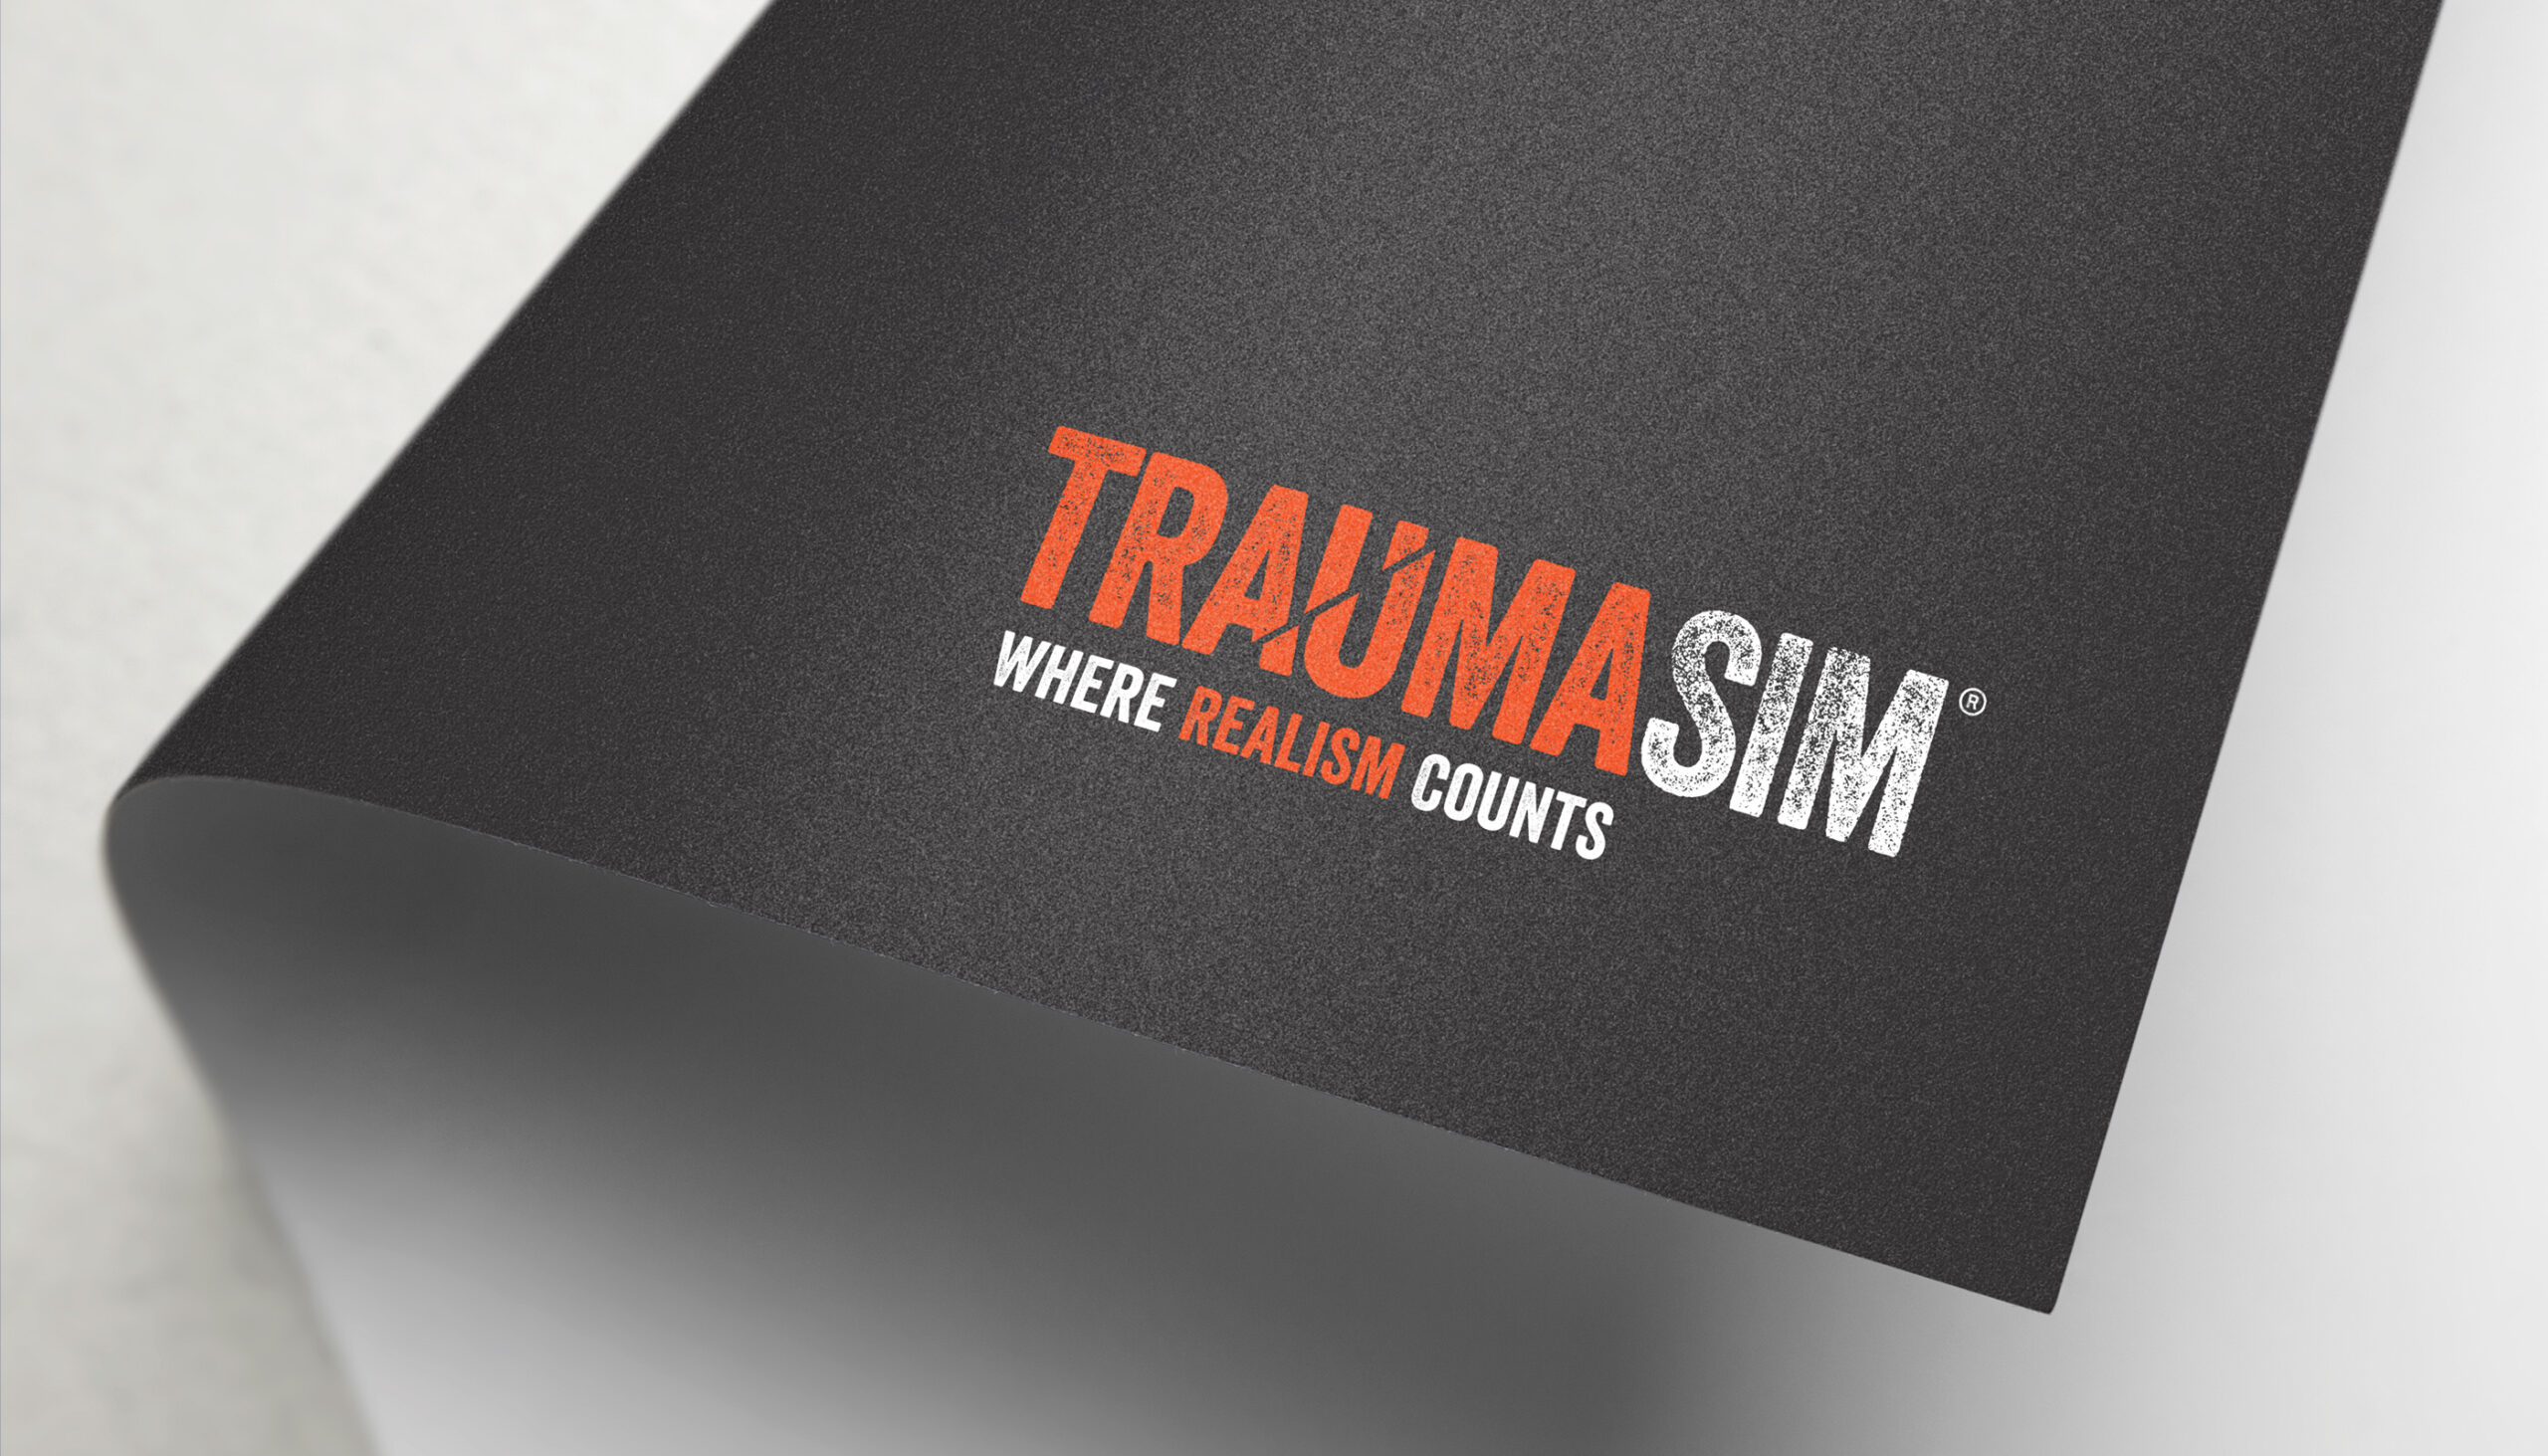 Trauma Sim Group Brand Identity, Graphic Design Merchandise and Signage Design and Development by TL Design Co.